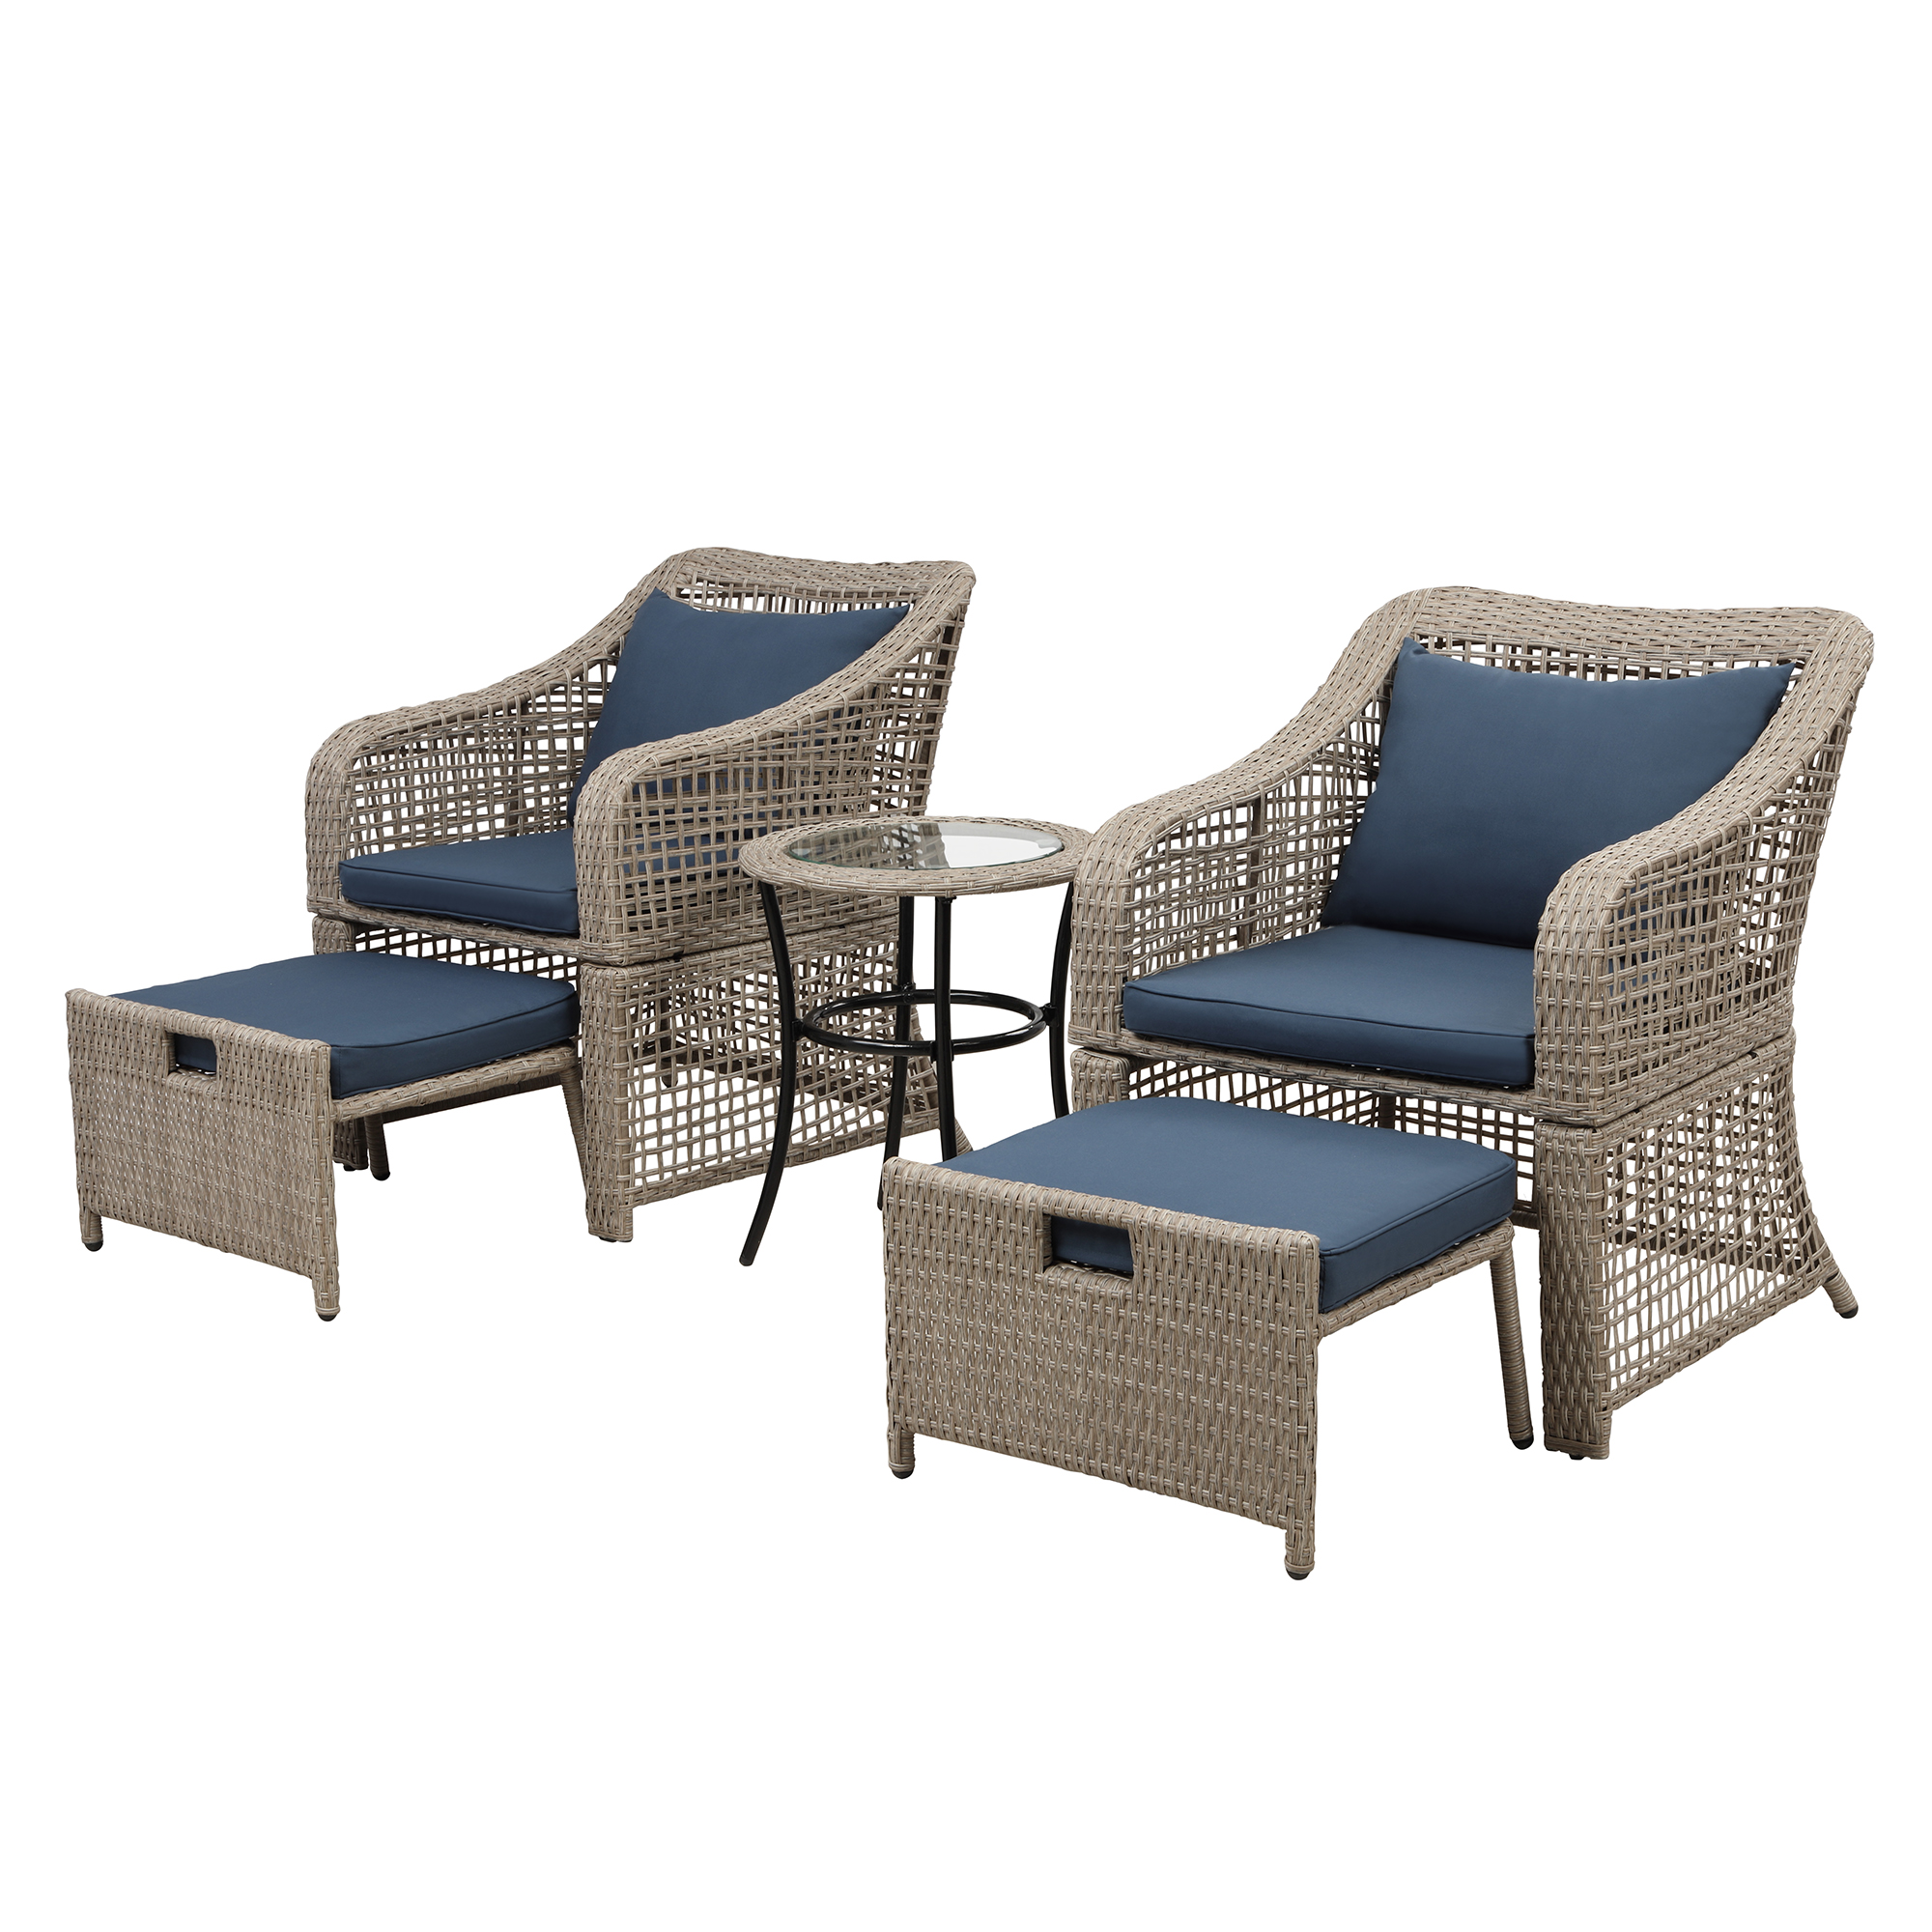 5 Piece Wicker Bistro Set, SEGMART Outdoor Lounge Chair Chat Conversation Set with 2 Cushioned Chairs, 2 Ottoman, Glass Table, PE Wicker Rattan Patio Furniture Set for Backyard, Porch, Garden, LLL331 - image 3 of 9